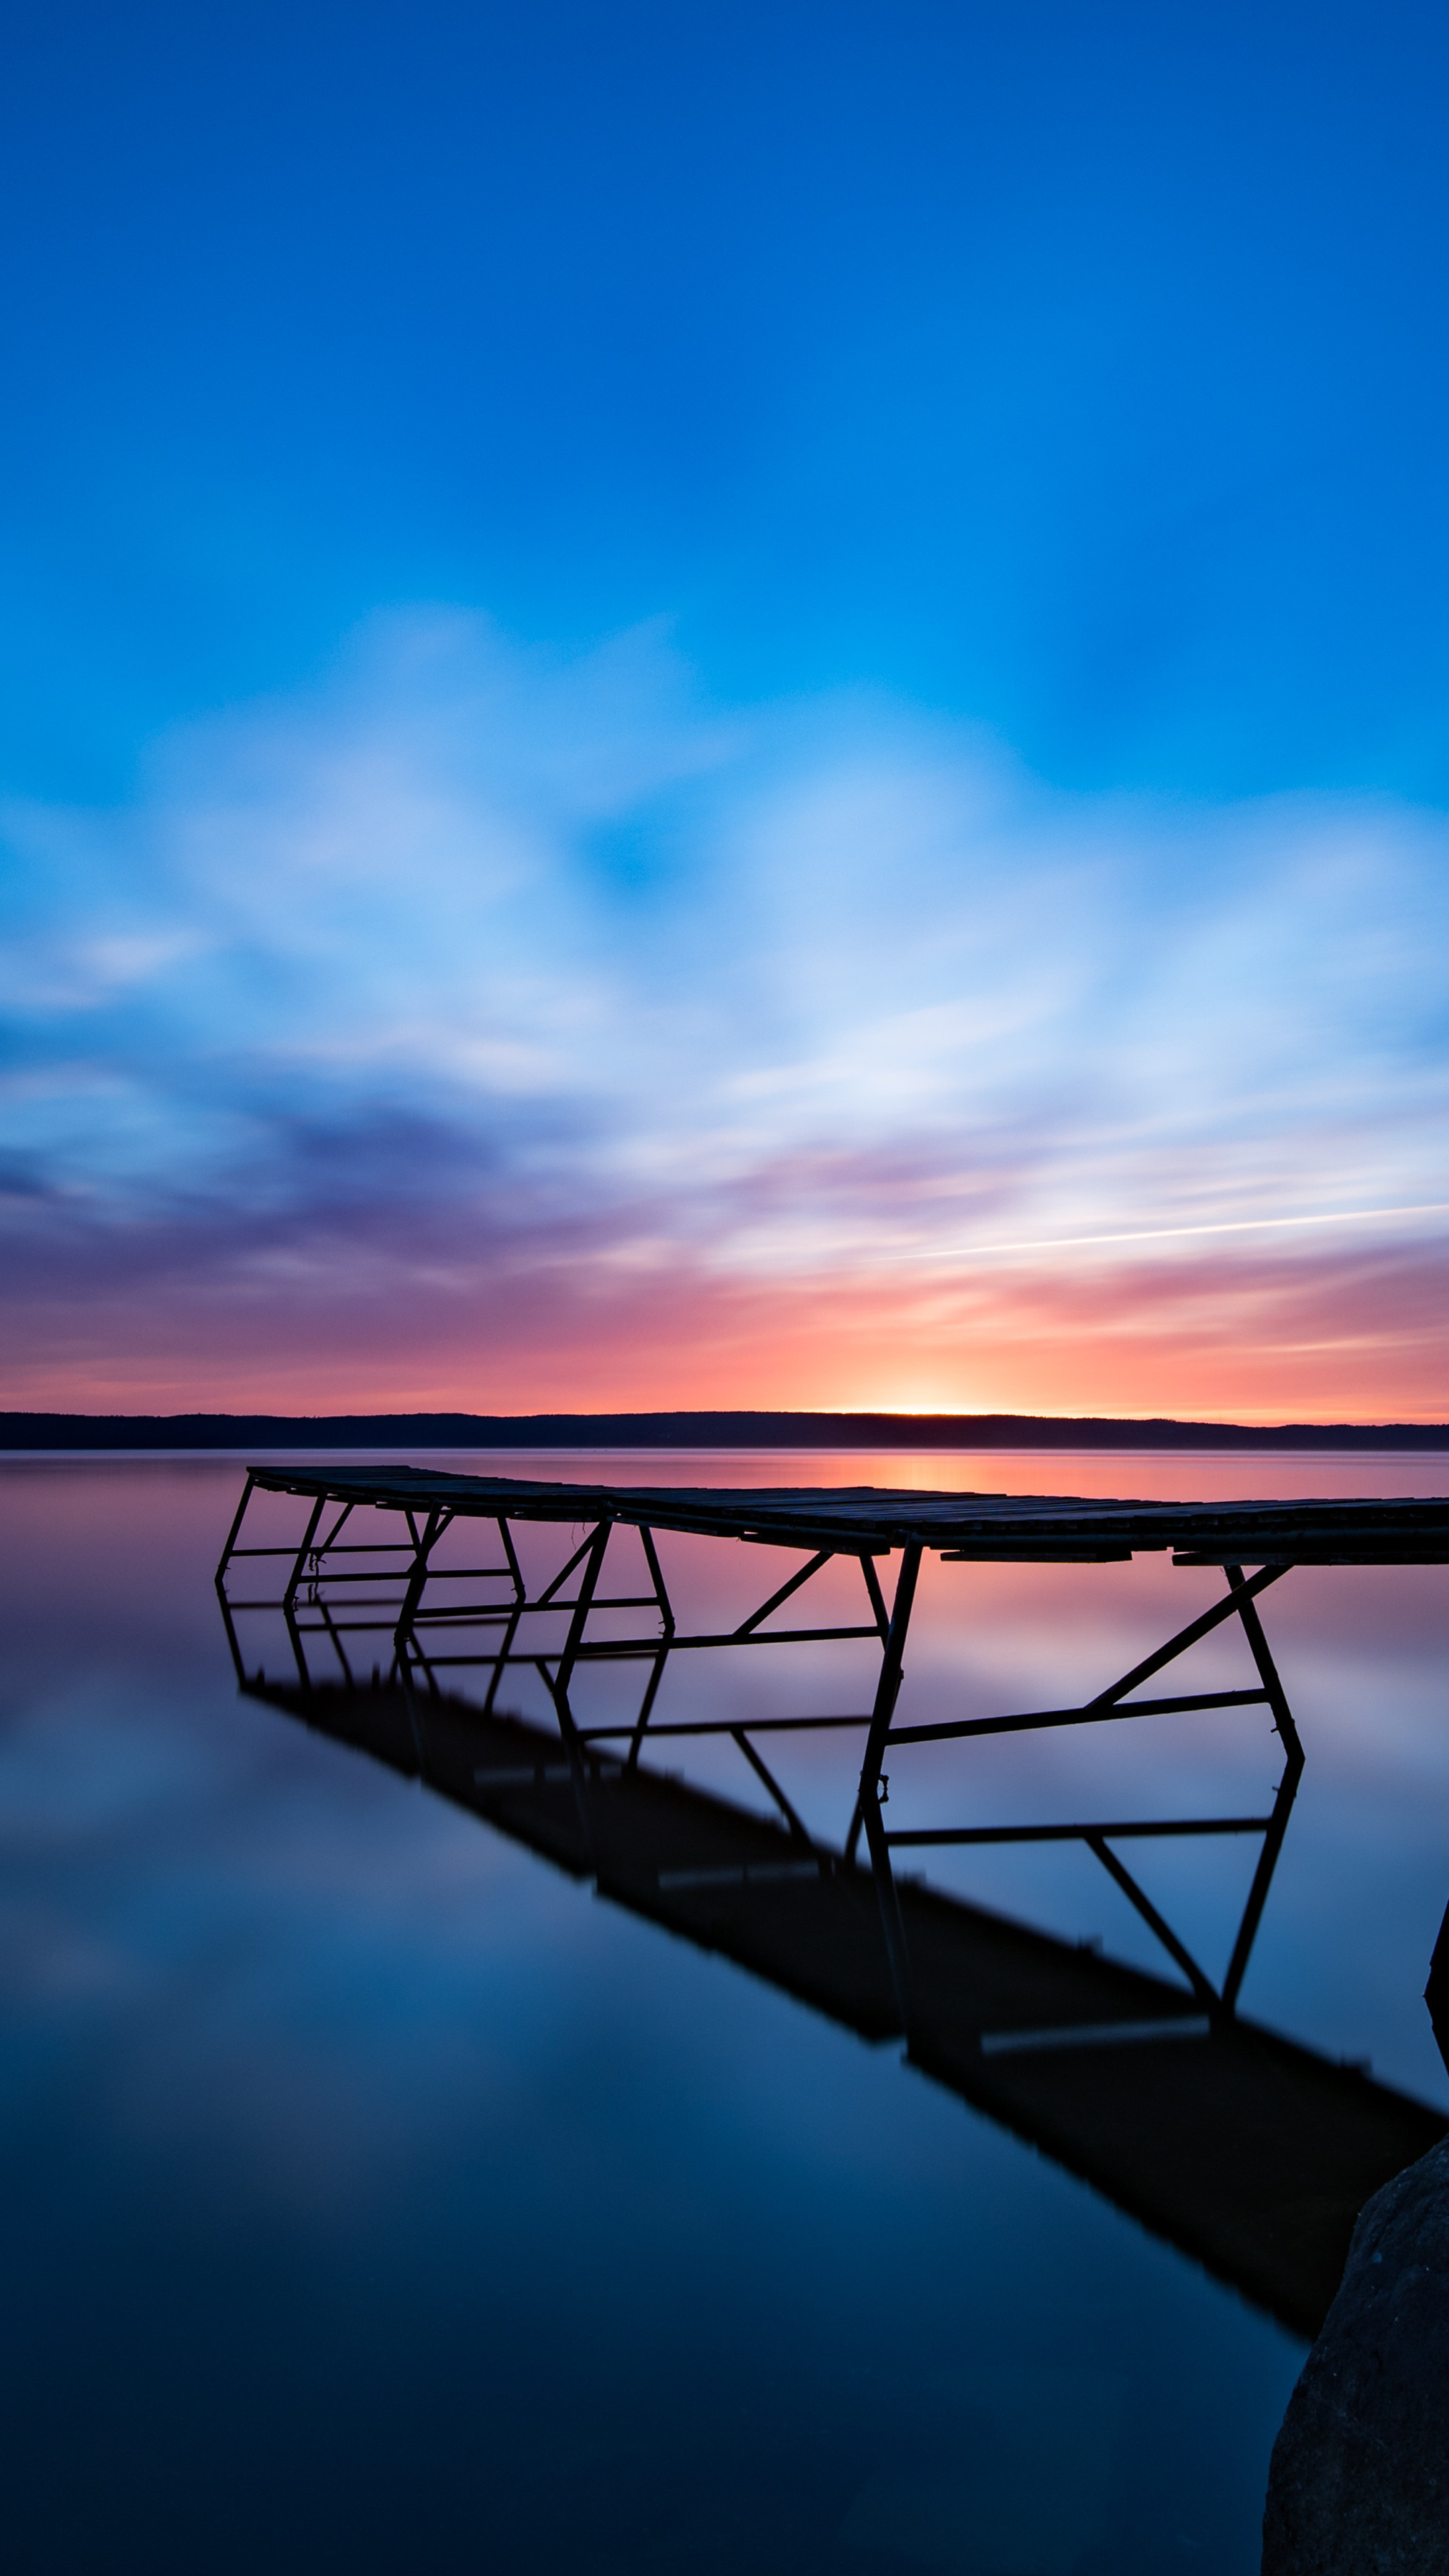 A long dock stretches out into a lake at sunset. - Sunrise